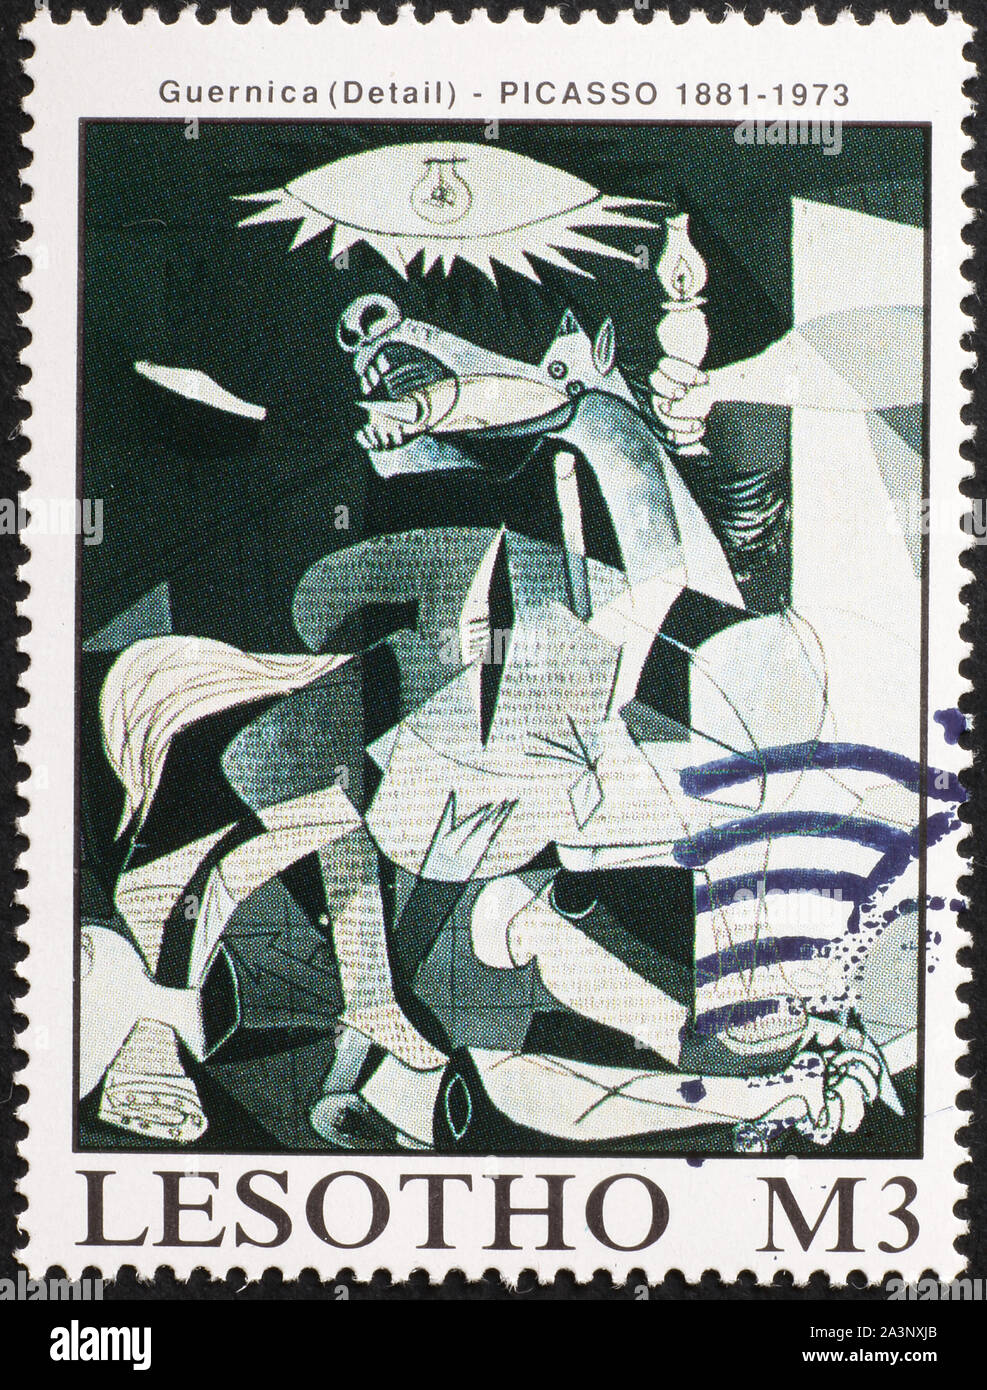 Detail from painting Guernica by Picasso on stamp Stock Photo